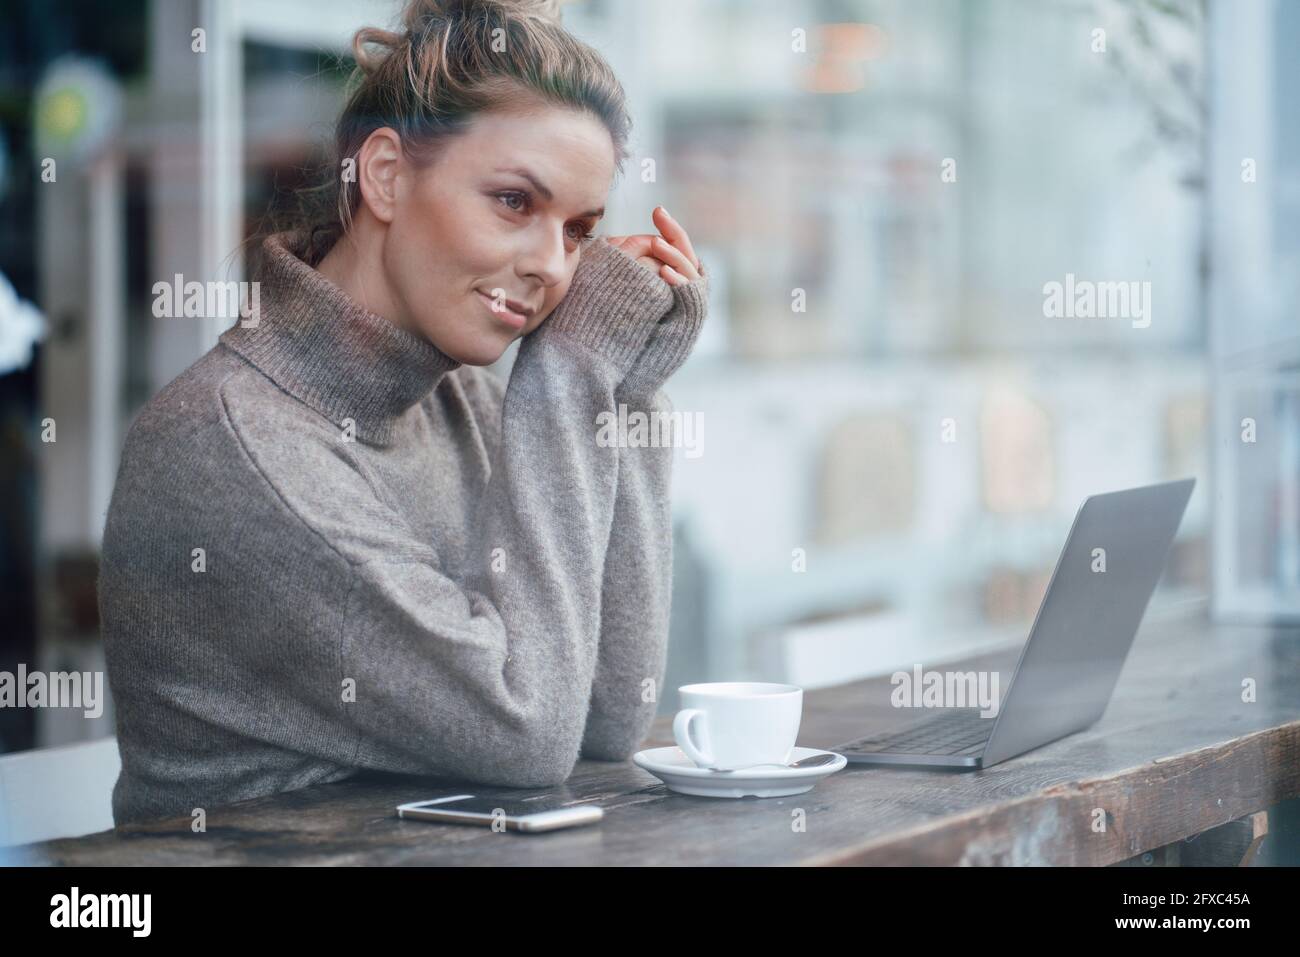 Mid adult business person contemplating while sitting by cafe window Stock Photo